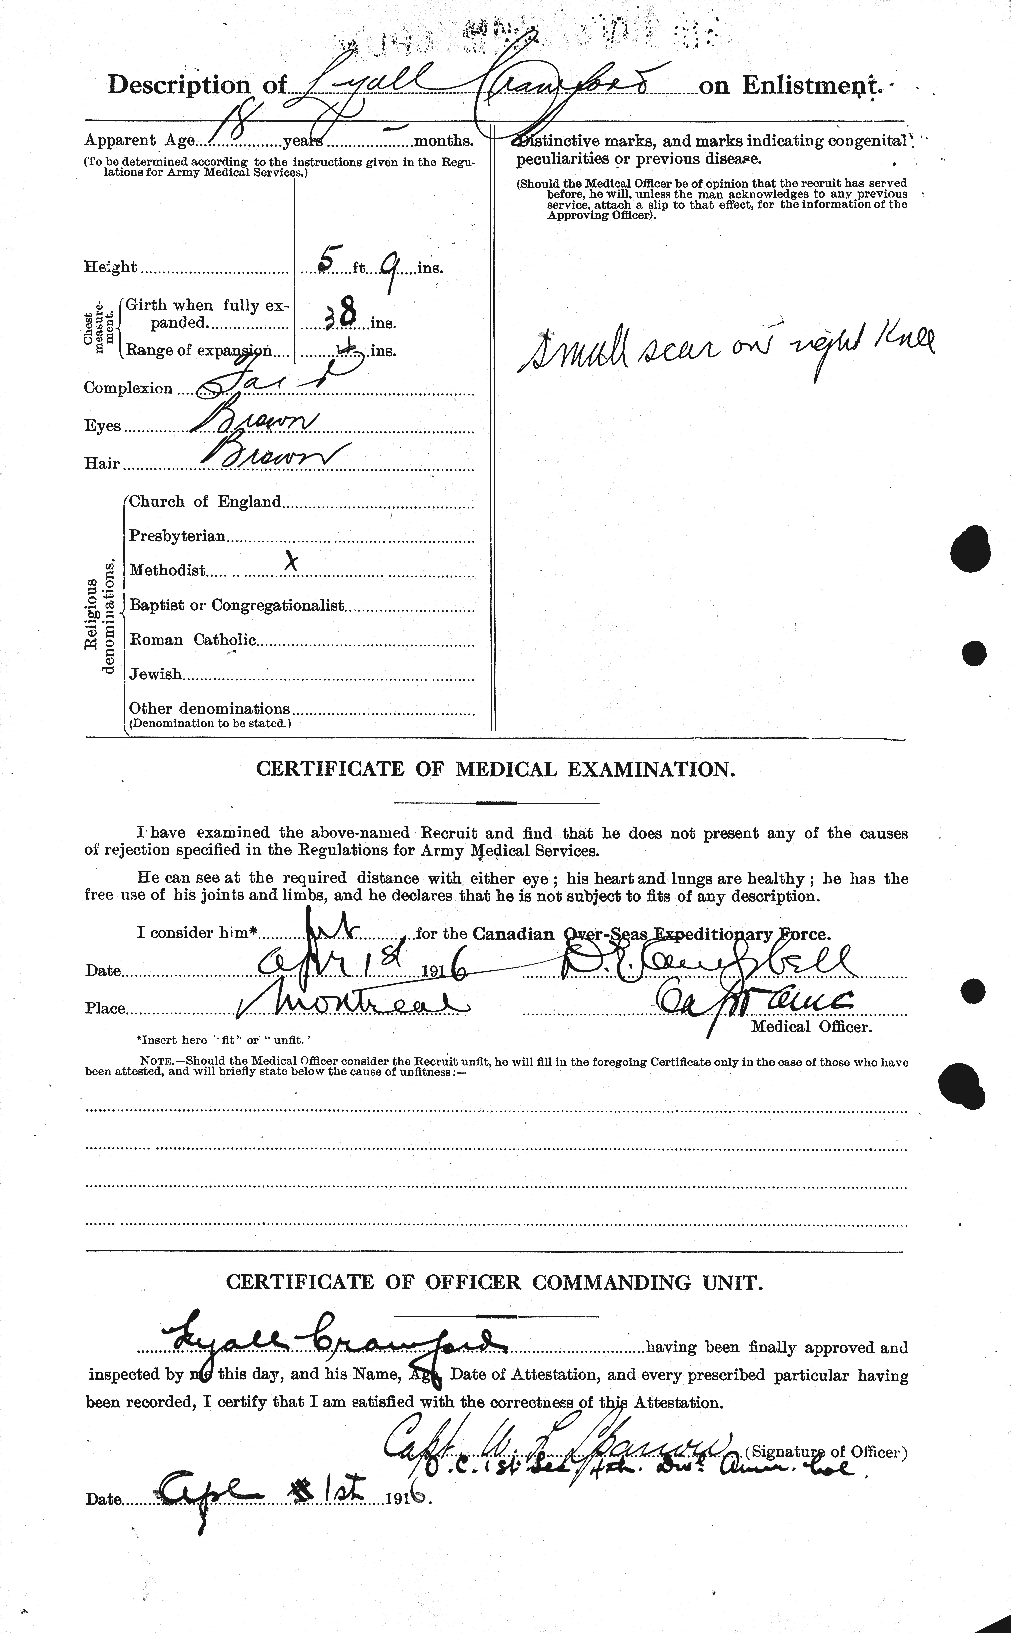 Personnel Records of the First World War - CEF 061787b